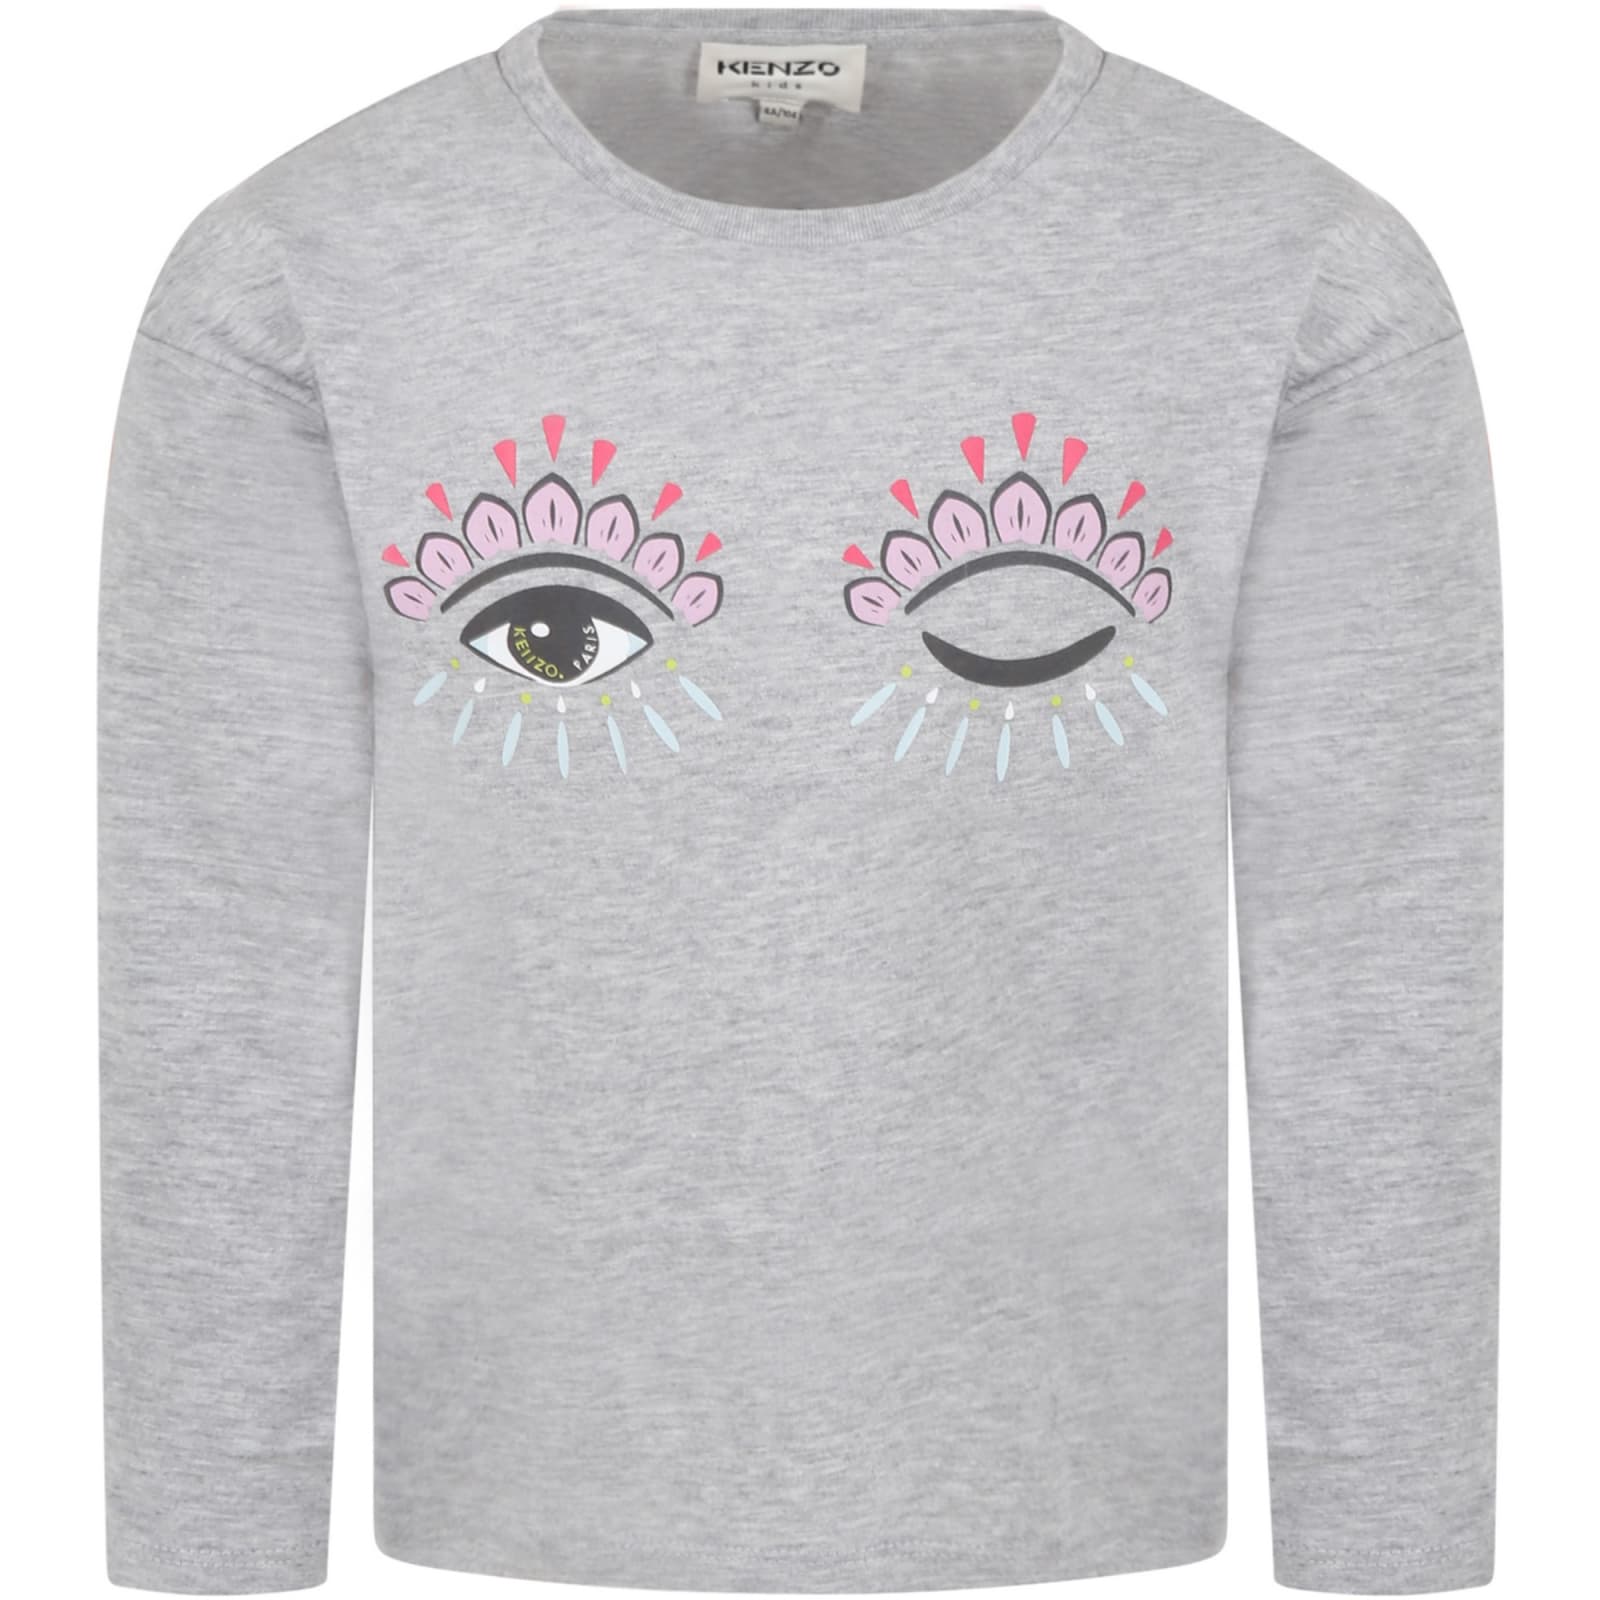 Kenzo Kids Grey T-shirt For Girl With Iconic Eyes